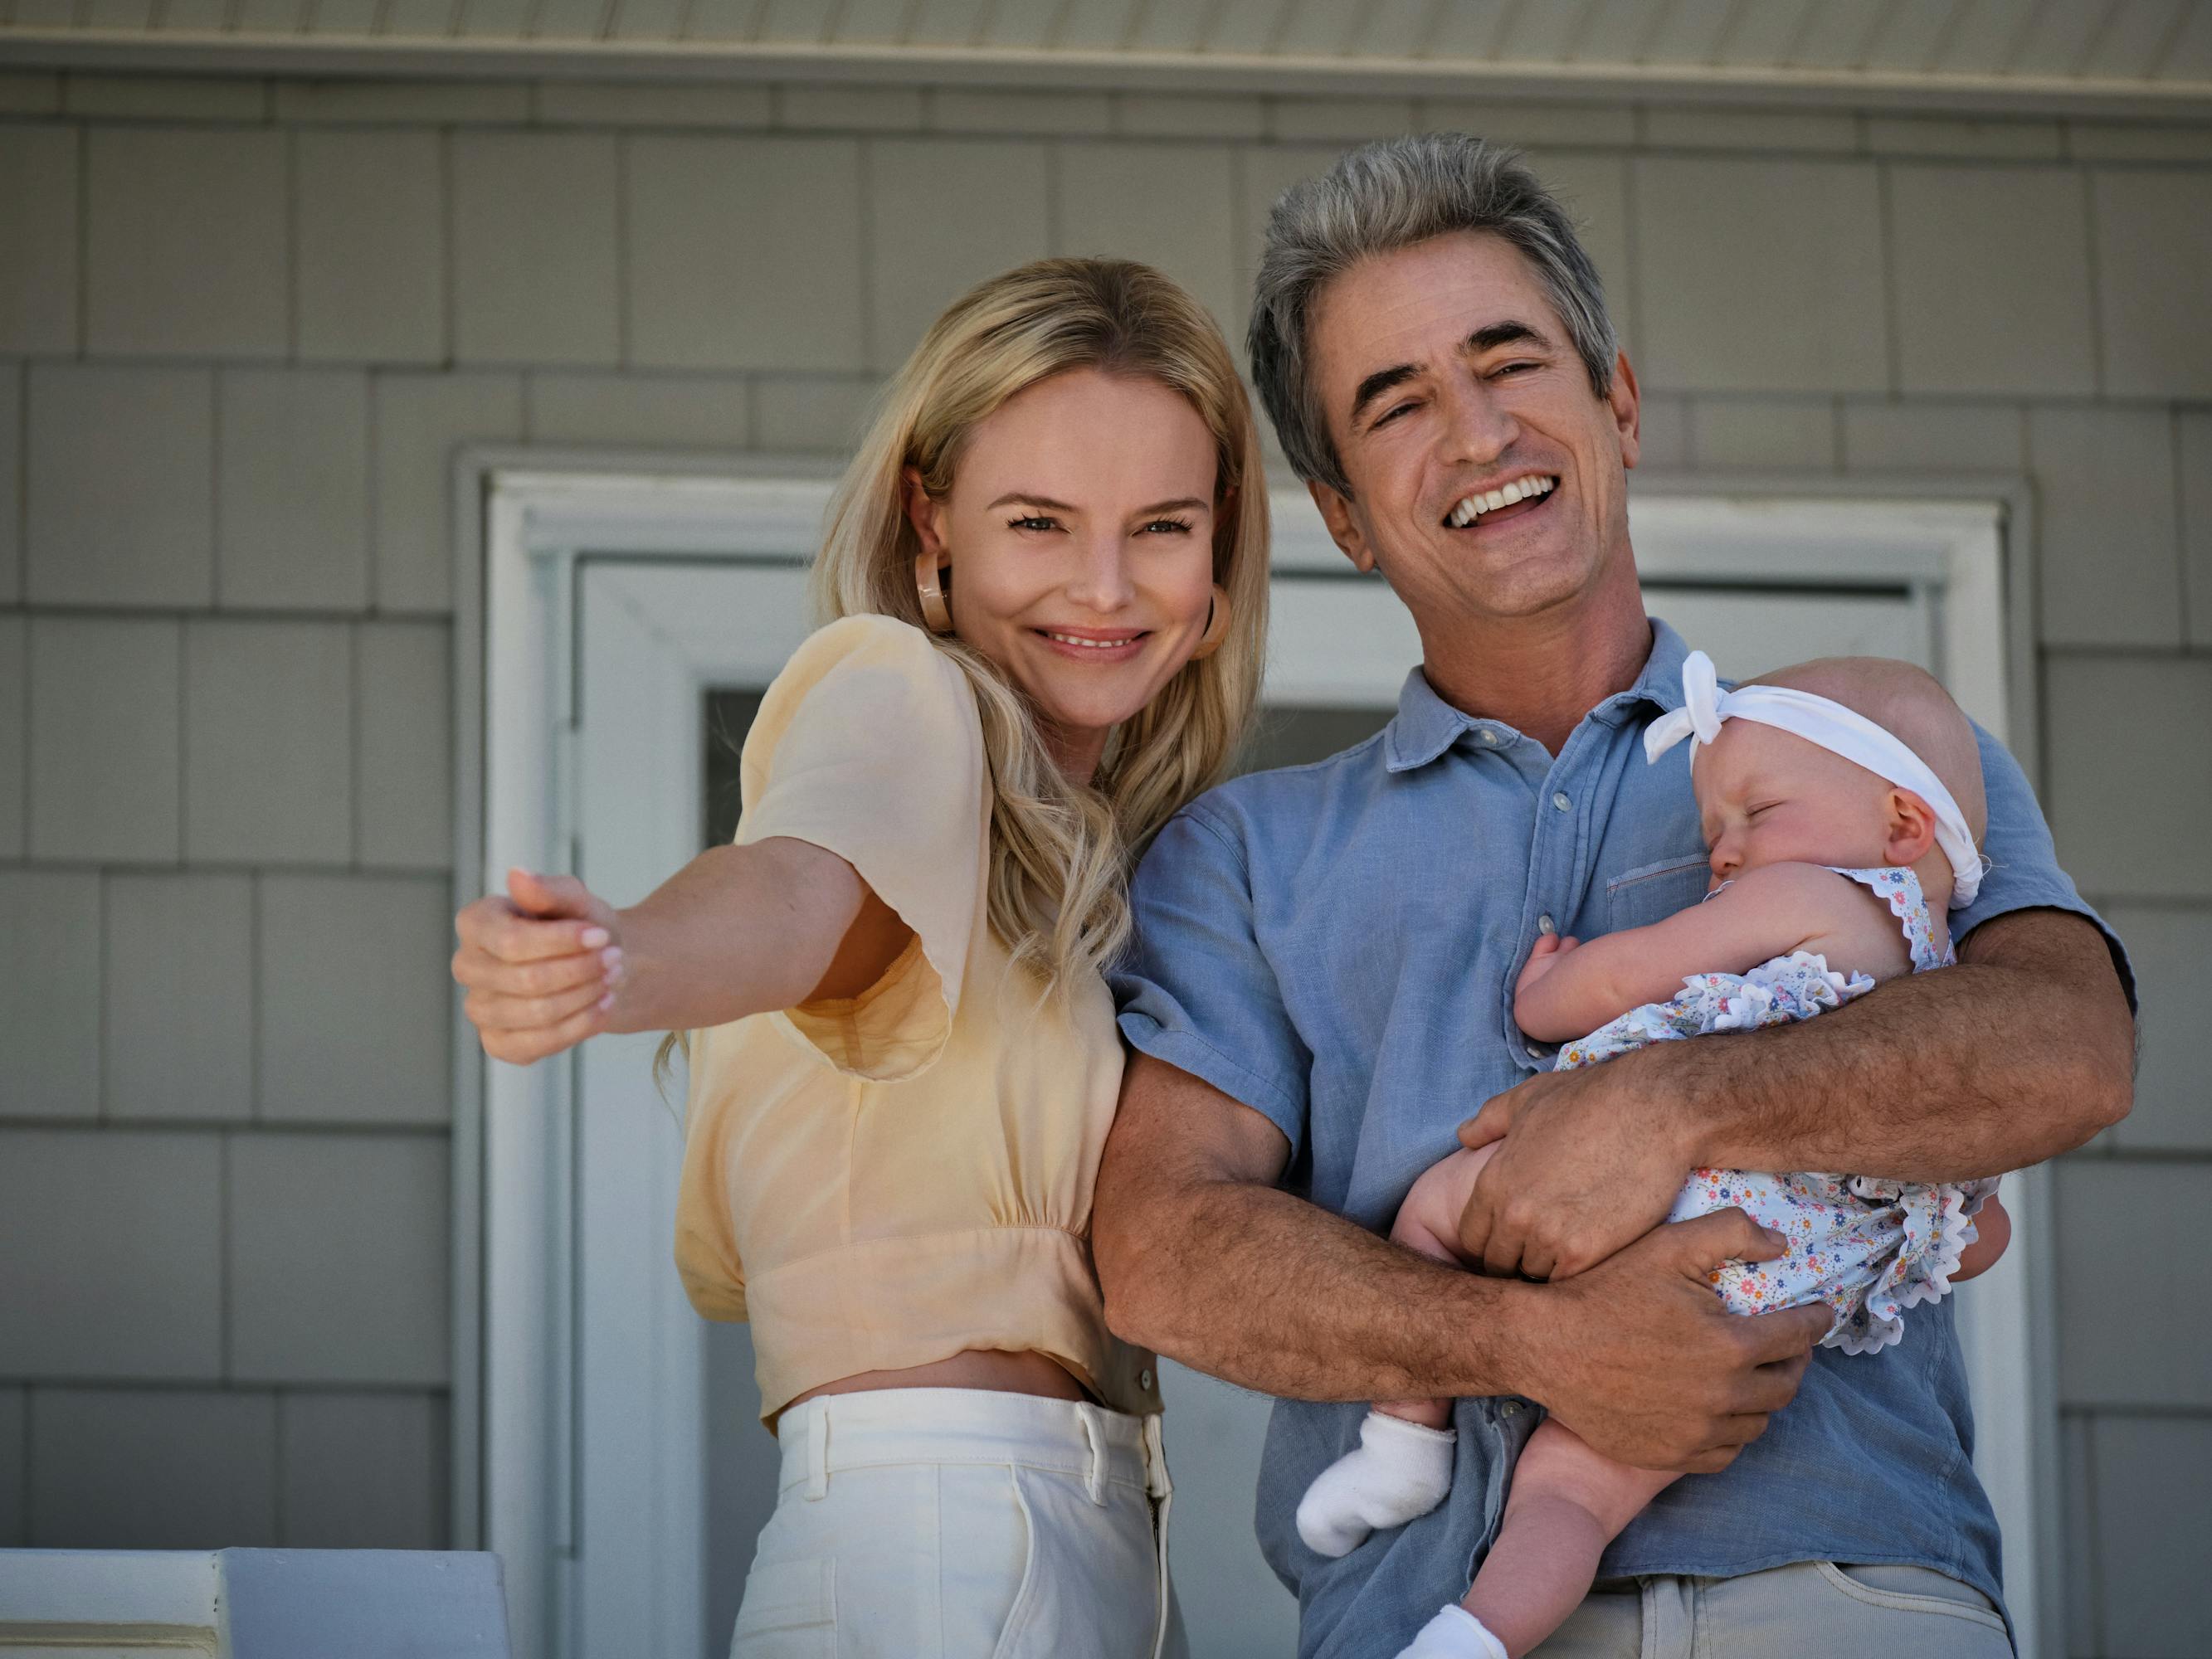 Heidi (Kate Bosworth) and Robert (Dermot Mulroney) stand on a porch holding a cute baby. She wears a yellow top and white pants, he wears a blue polo and khakis. The baby wears a white headband, a white onesize, and white socks.